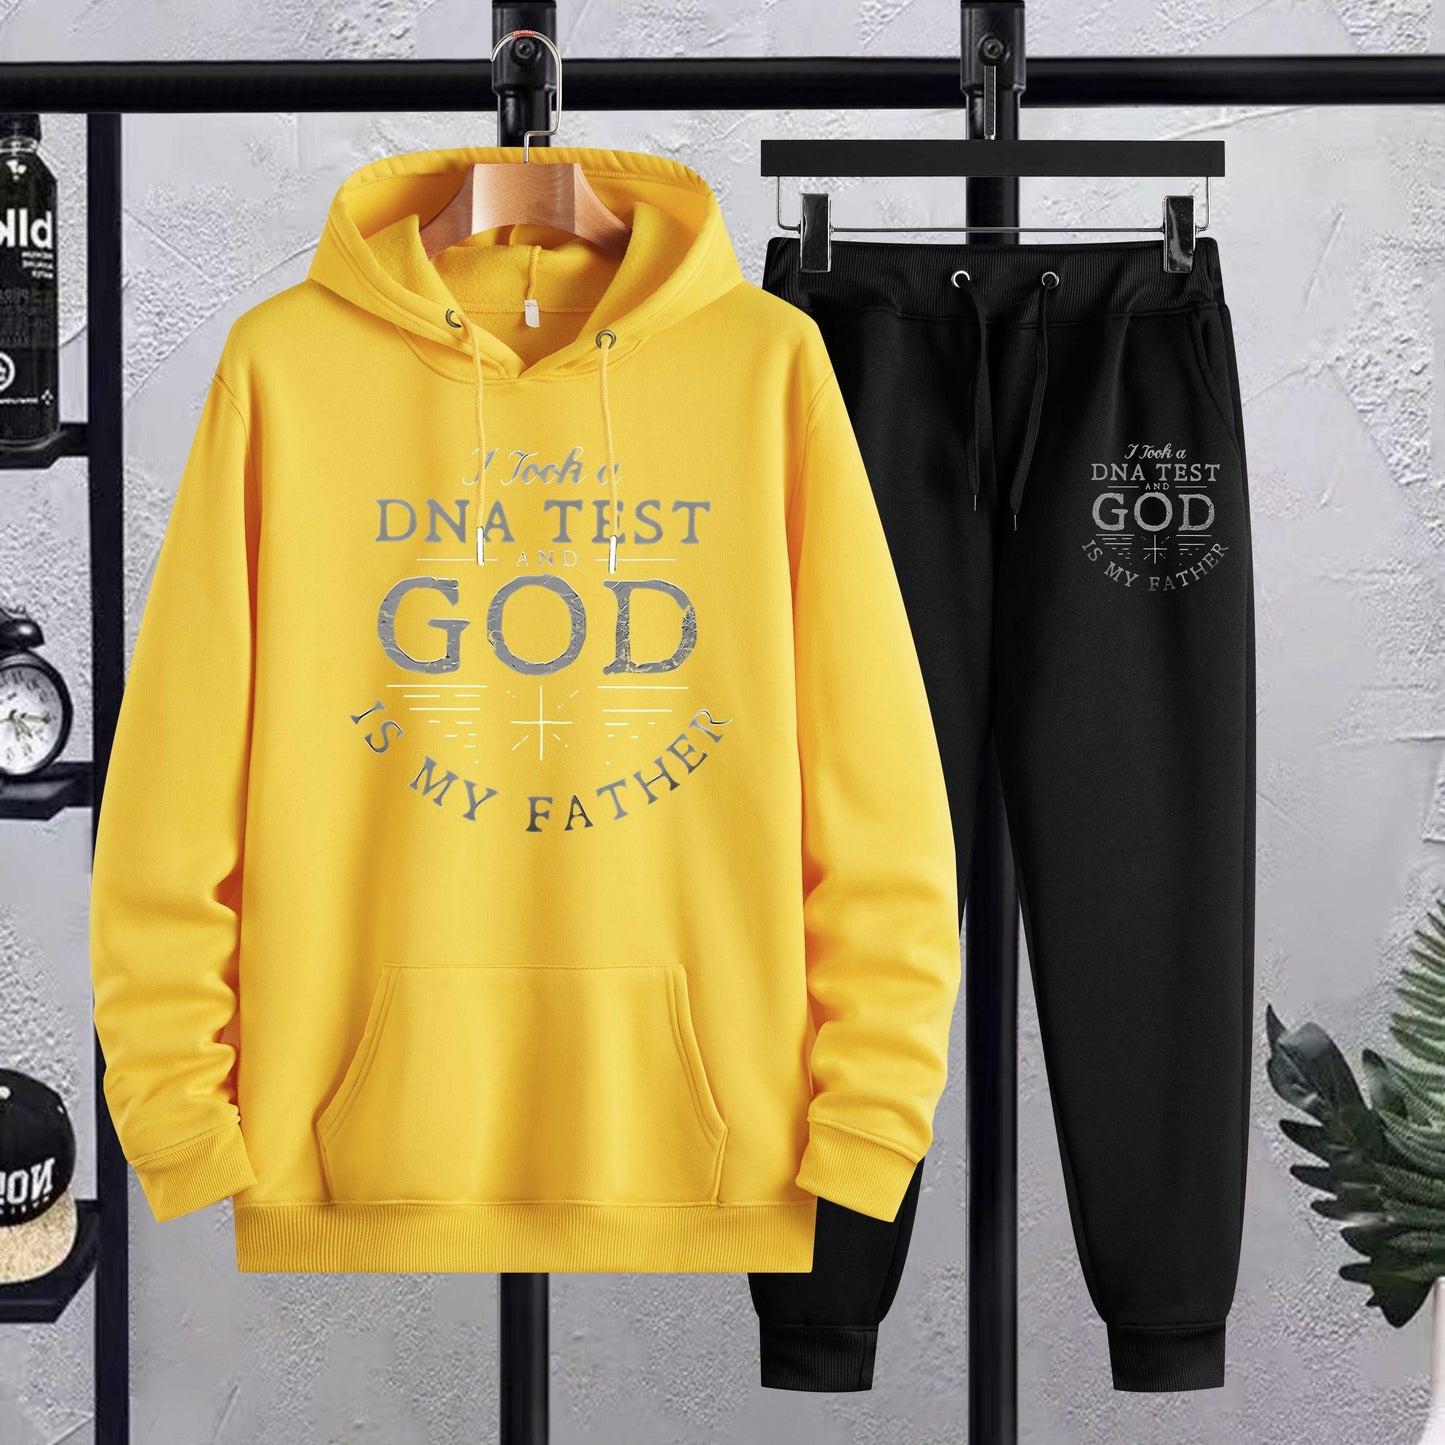 I Took A DNA Test And God Is My Father Plus Size Men's Christian Casual Outfit claimedbygoddesigns